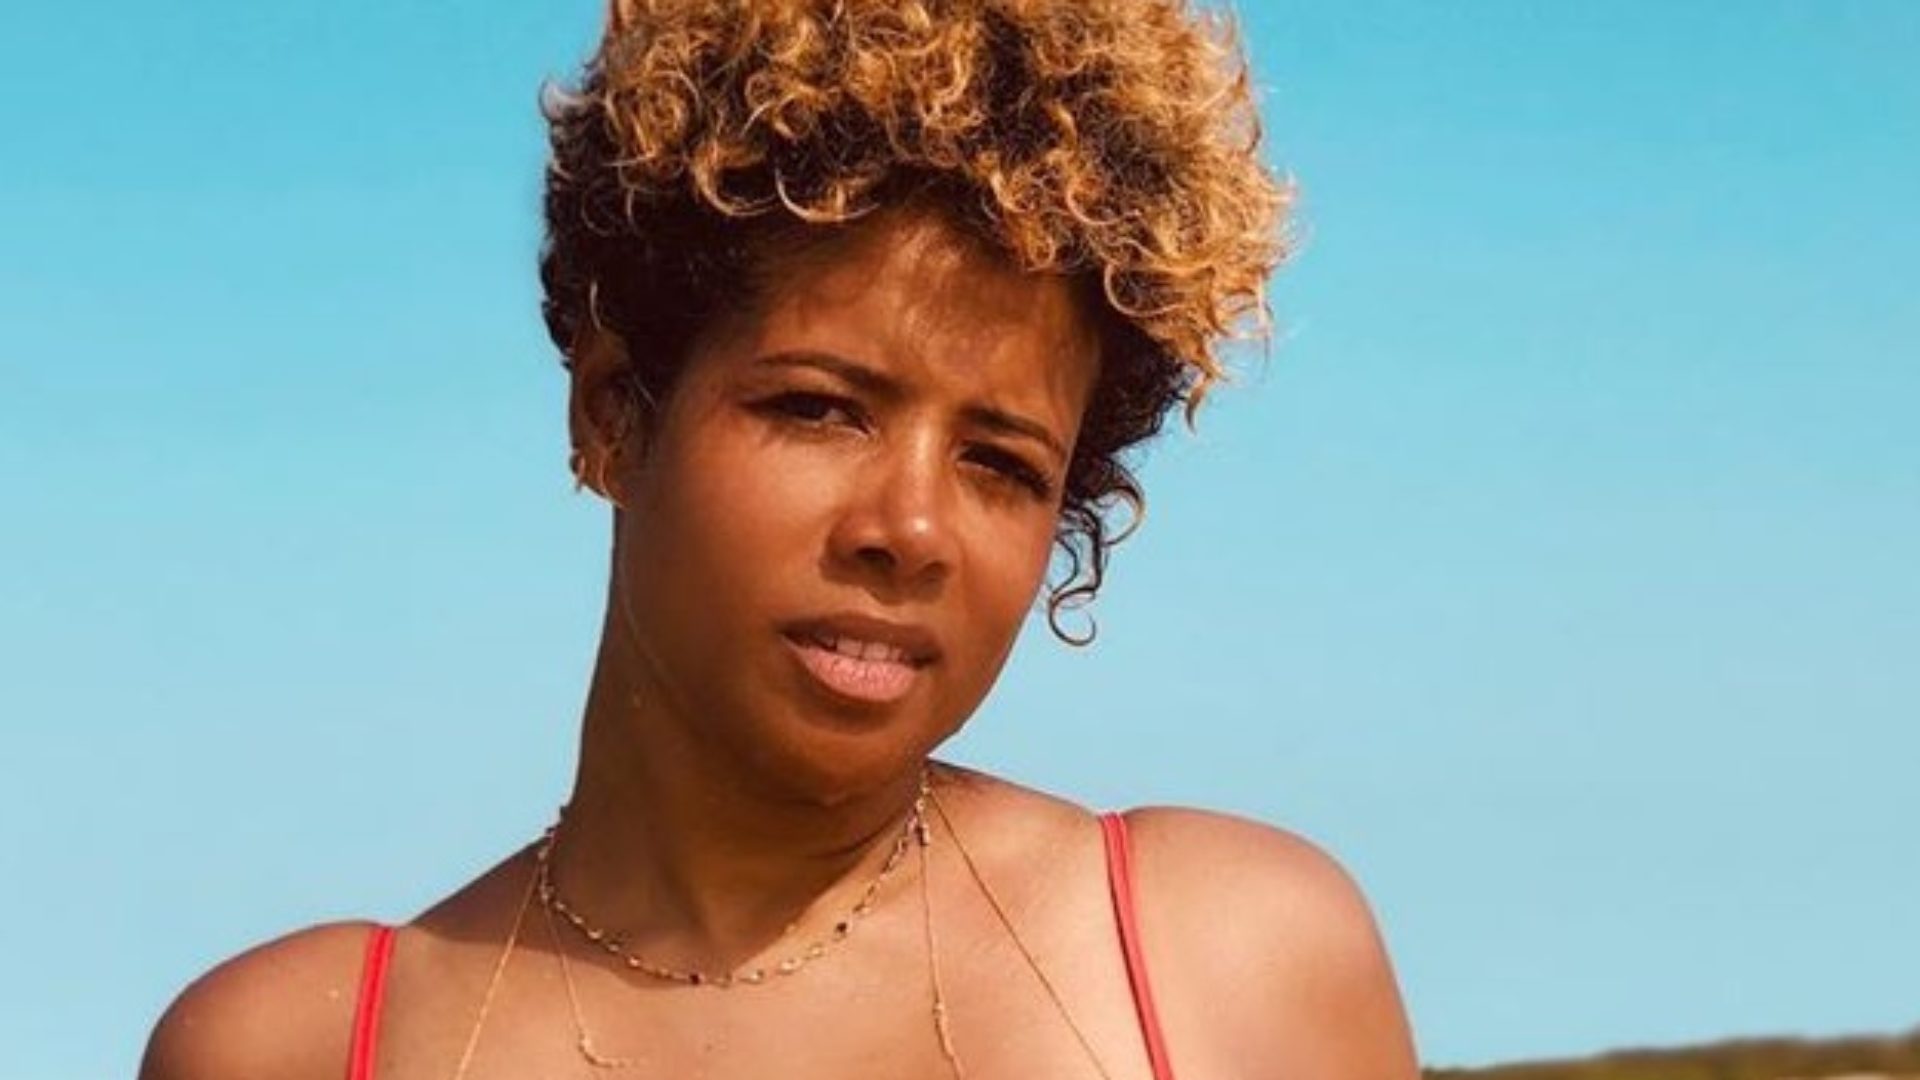 ICYMI: Kelis Dishes About How To Pack Light And Stay Stylish On Vacation